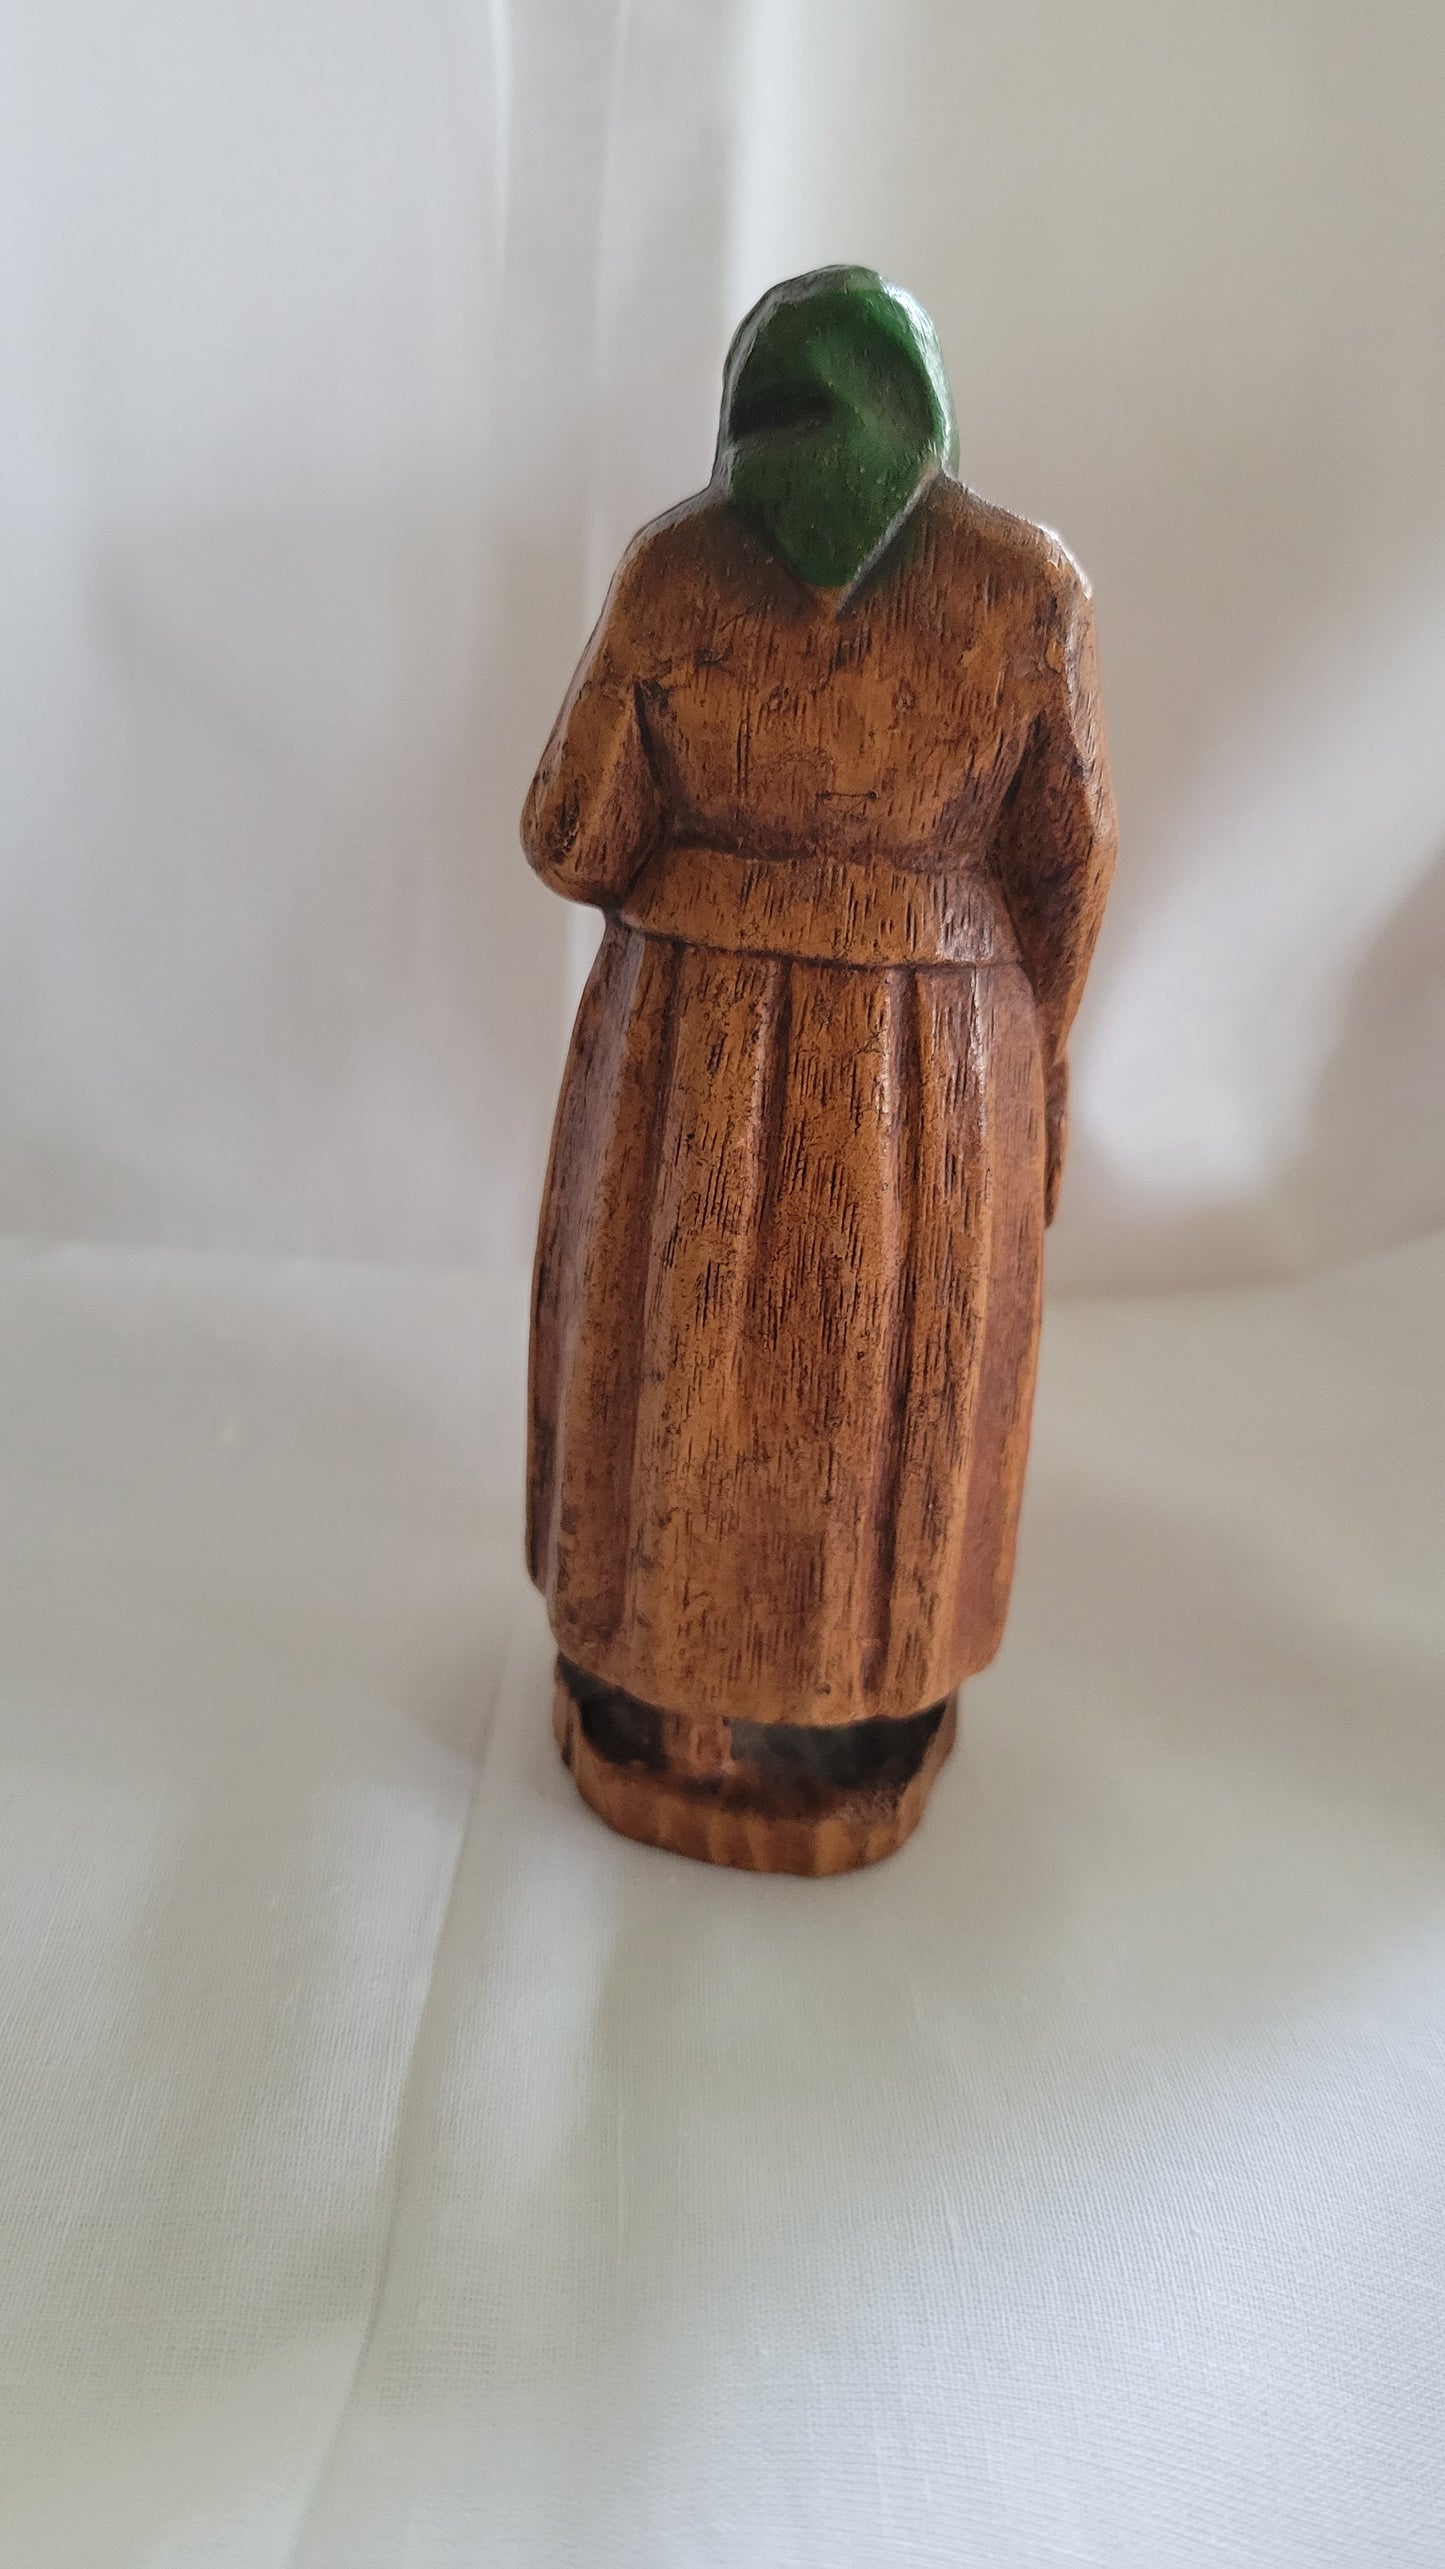 Small Jewish, Yiddish grandmother or Bubbe figure, antique, holding Jewish Bible, possibly SyrocoWood. Back view.